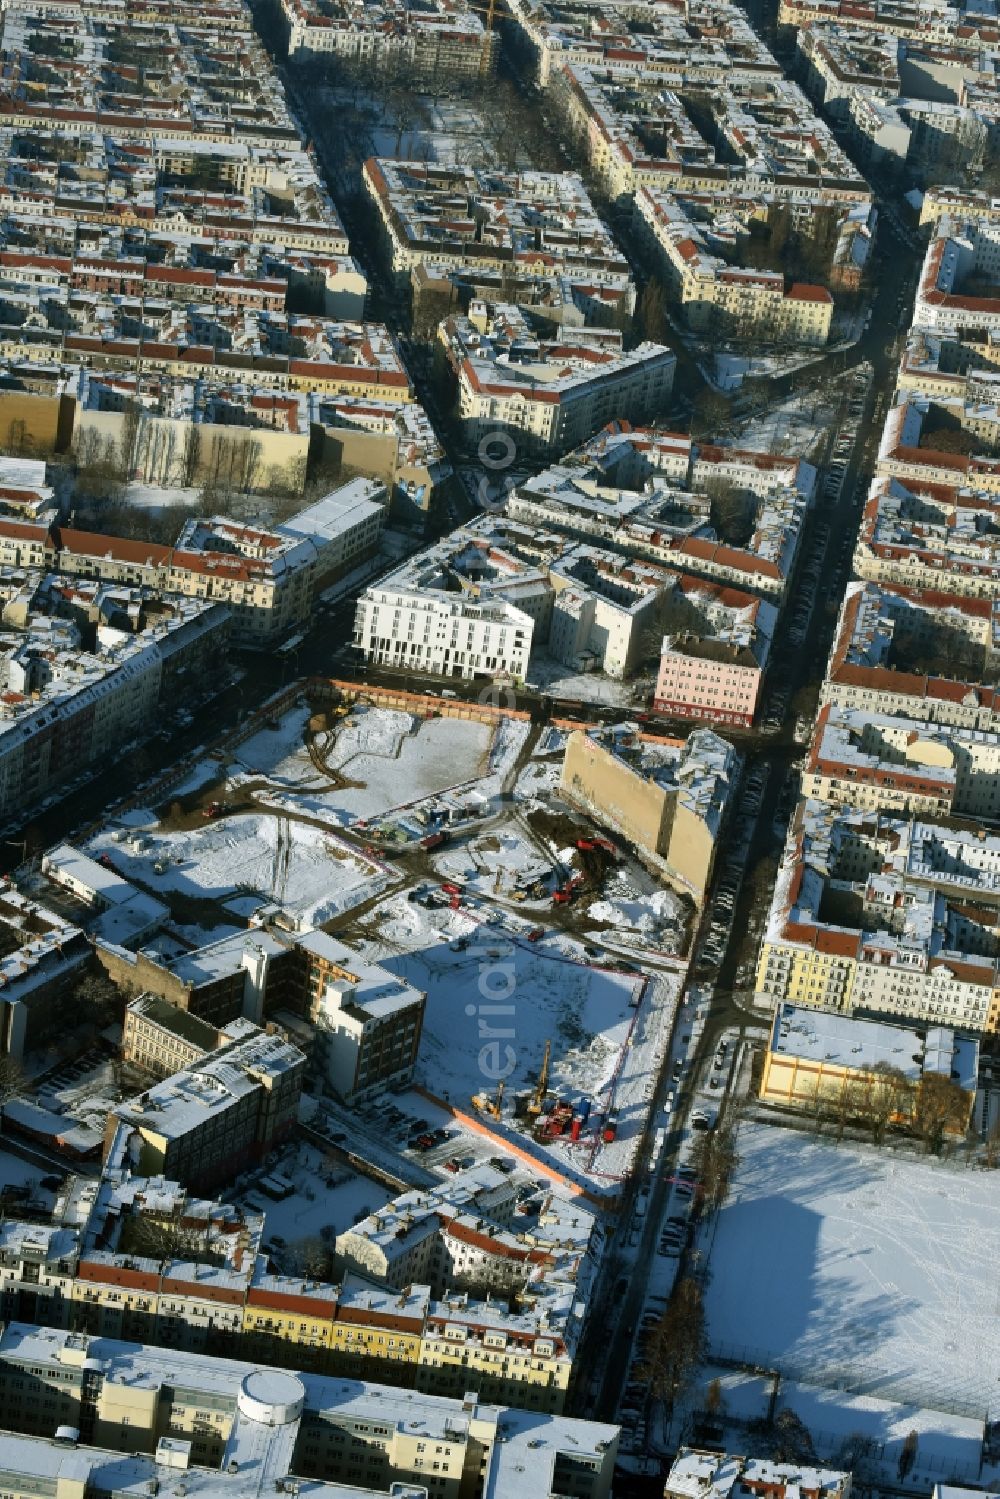 Aerial photograph Berlin - Site Freudenberg complex in the residential area of the Boxhagener Strasse in Berlin Friedrichshain. In wintry snowy conditions currently Public Works for groundwater lowering and ground investigation by the civil engineering firm POLLEMS GMBH special be done